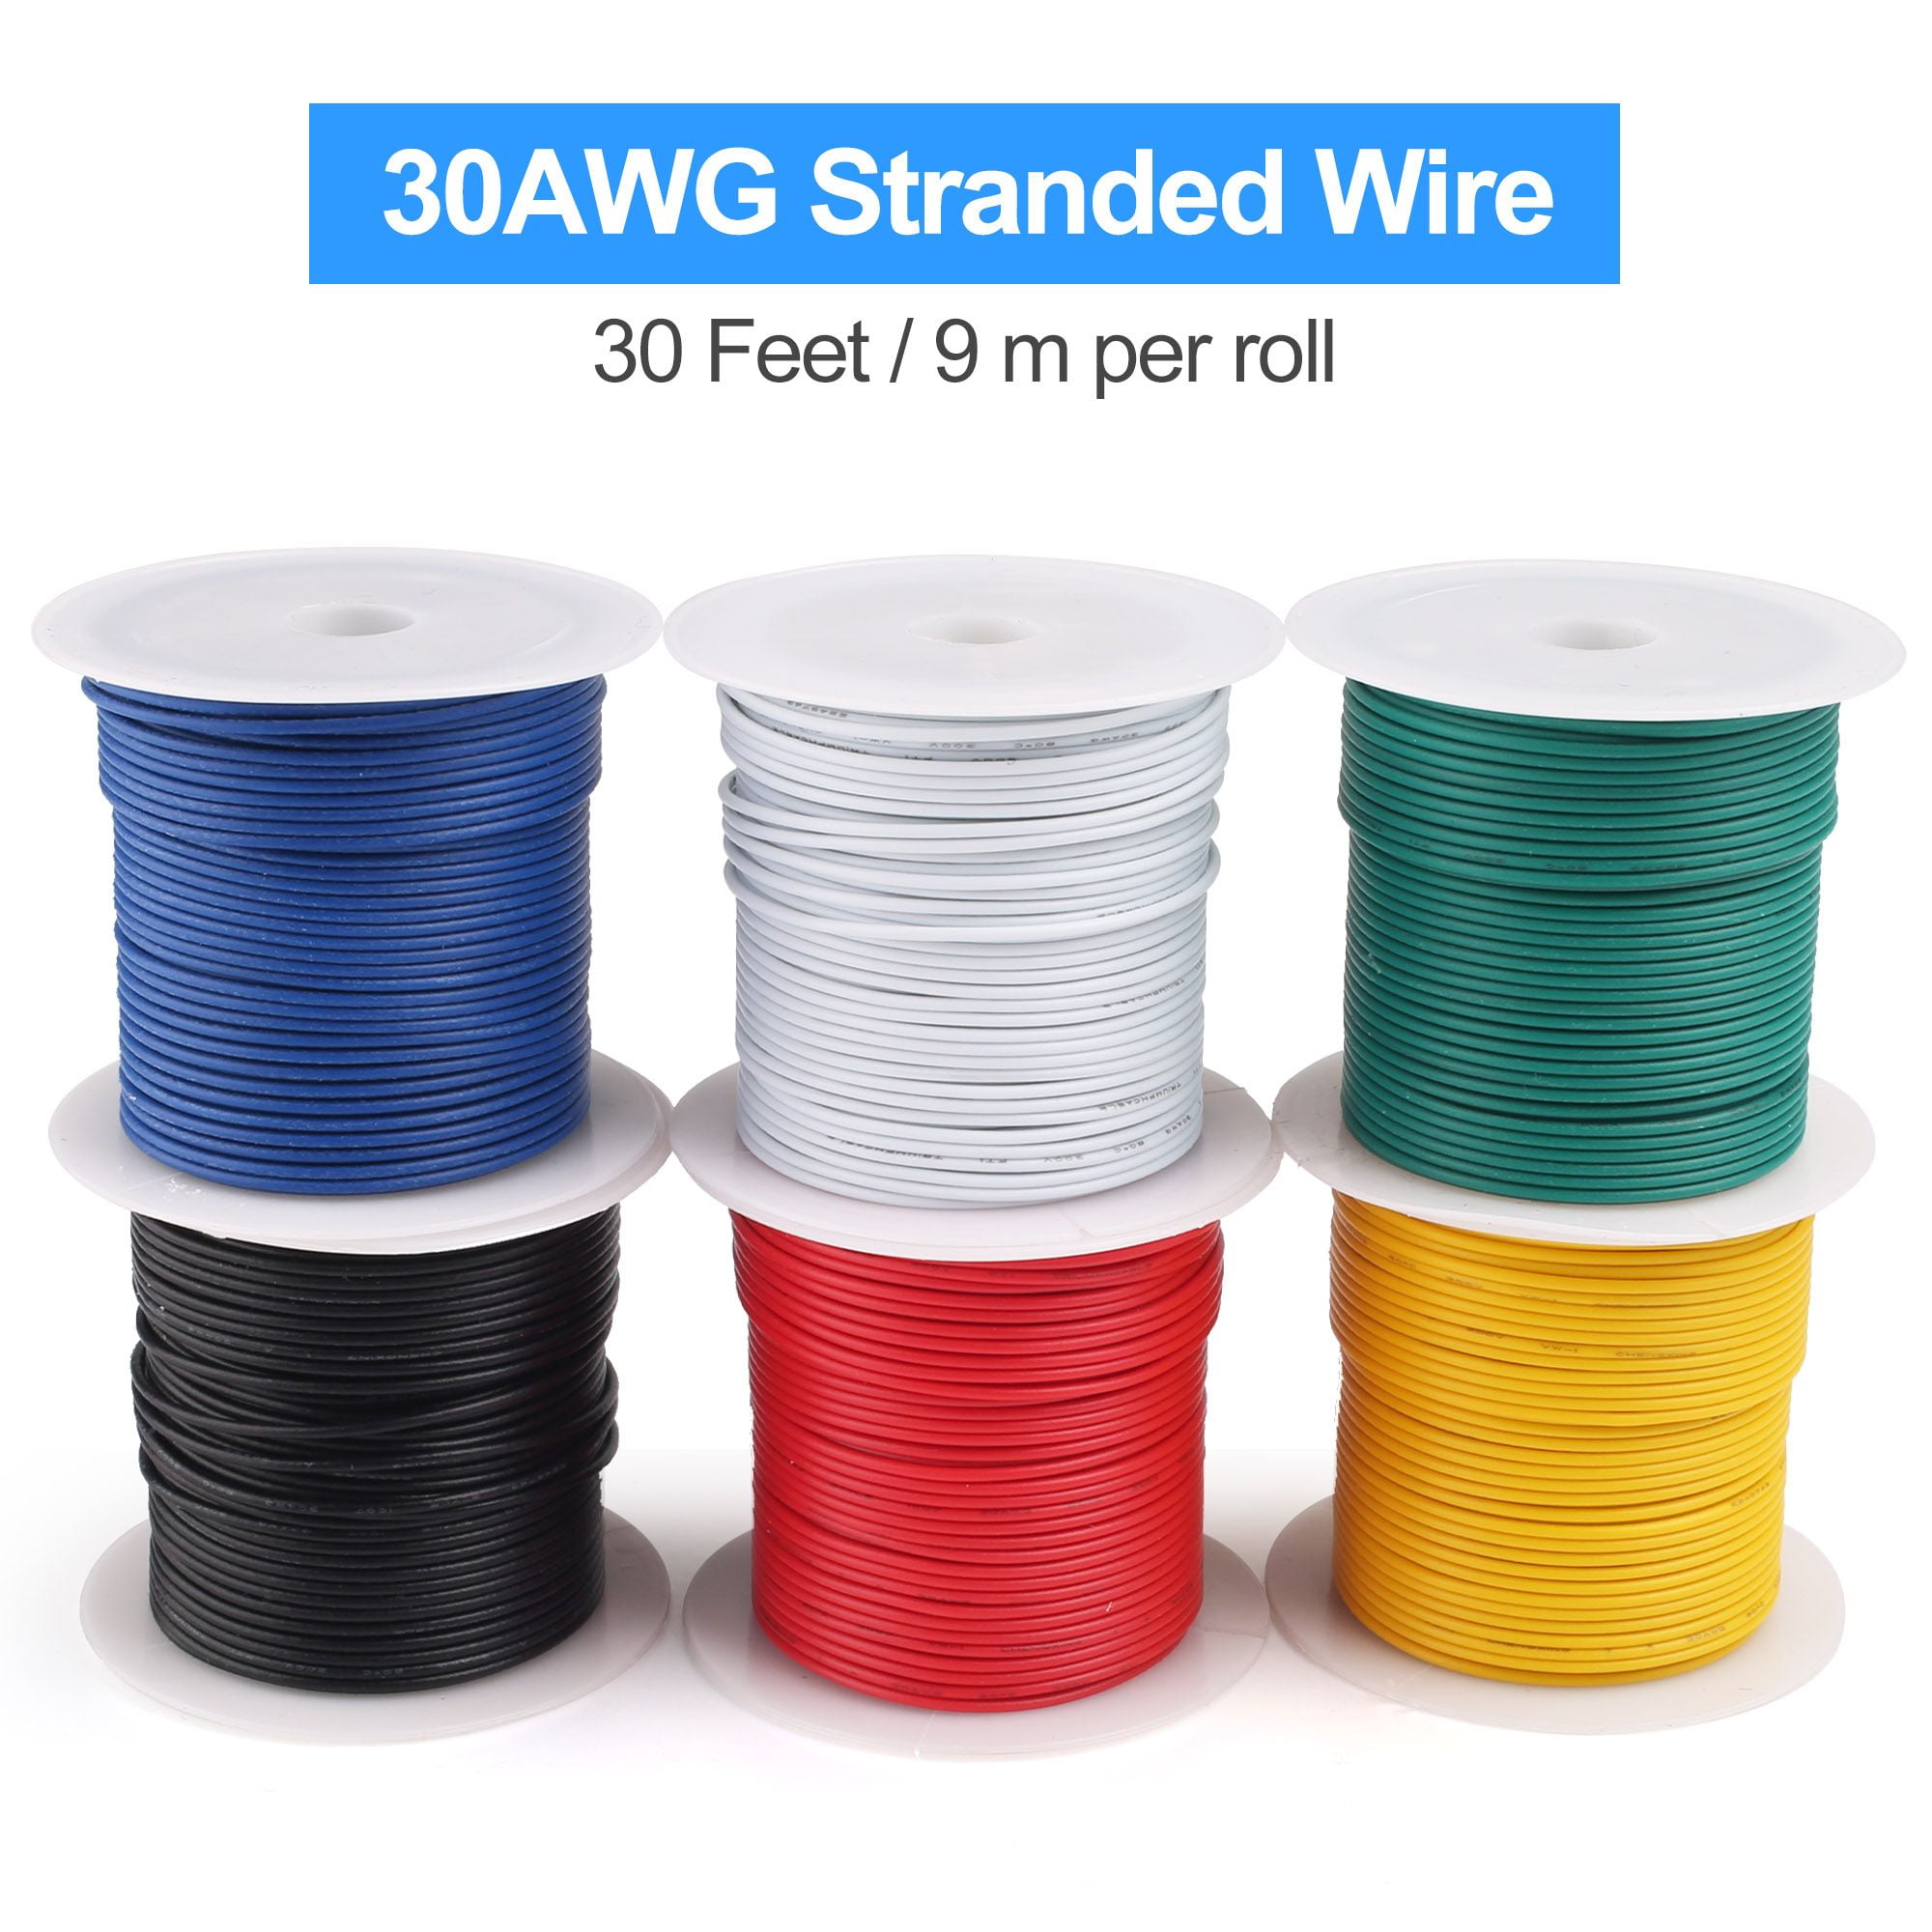 LotFancy 30AWG Stranded Wire, 6 Colors (30 feet/9 m Each) Electrical Wire,  UL Listed 